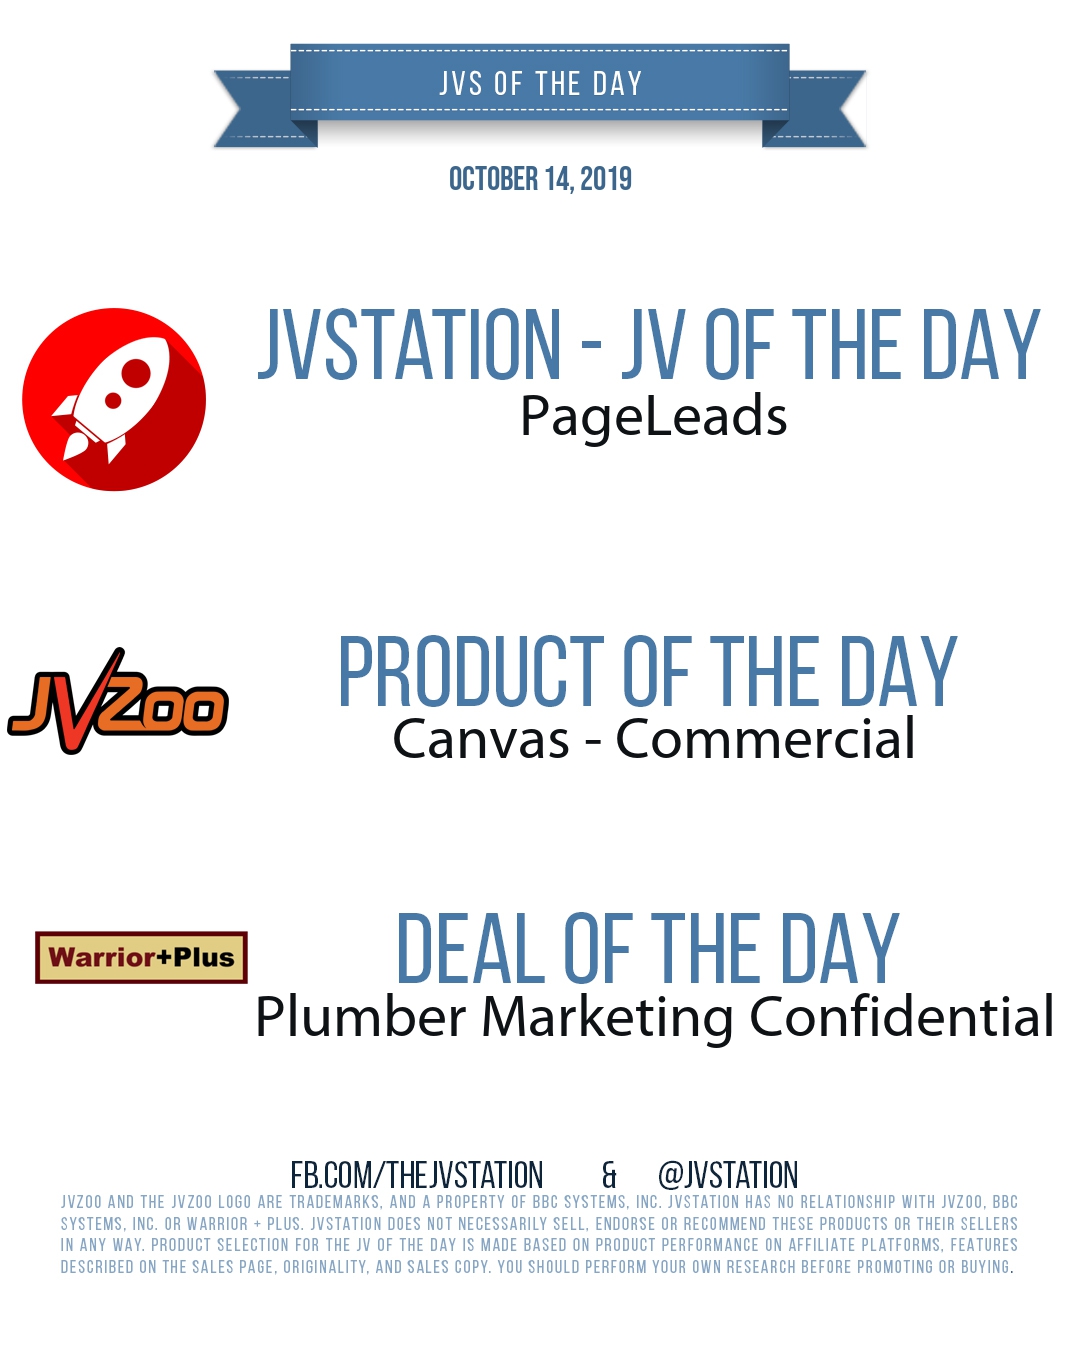 JVs of the day - October 14, 2019